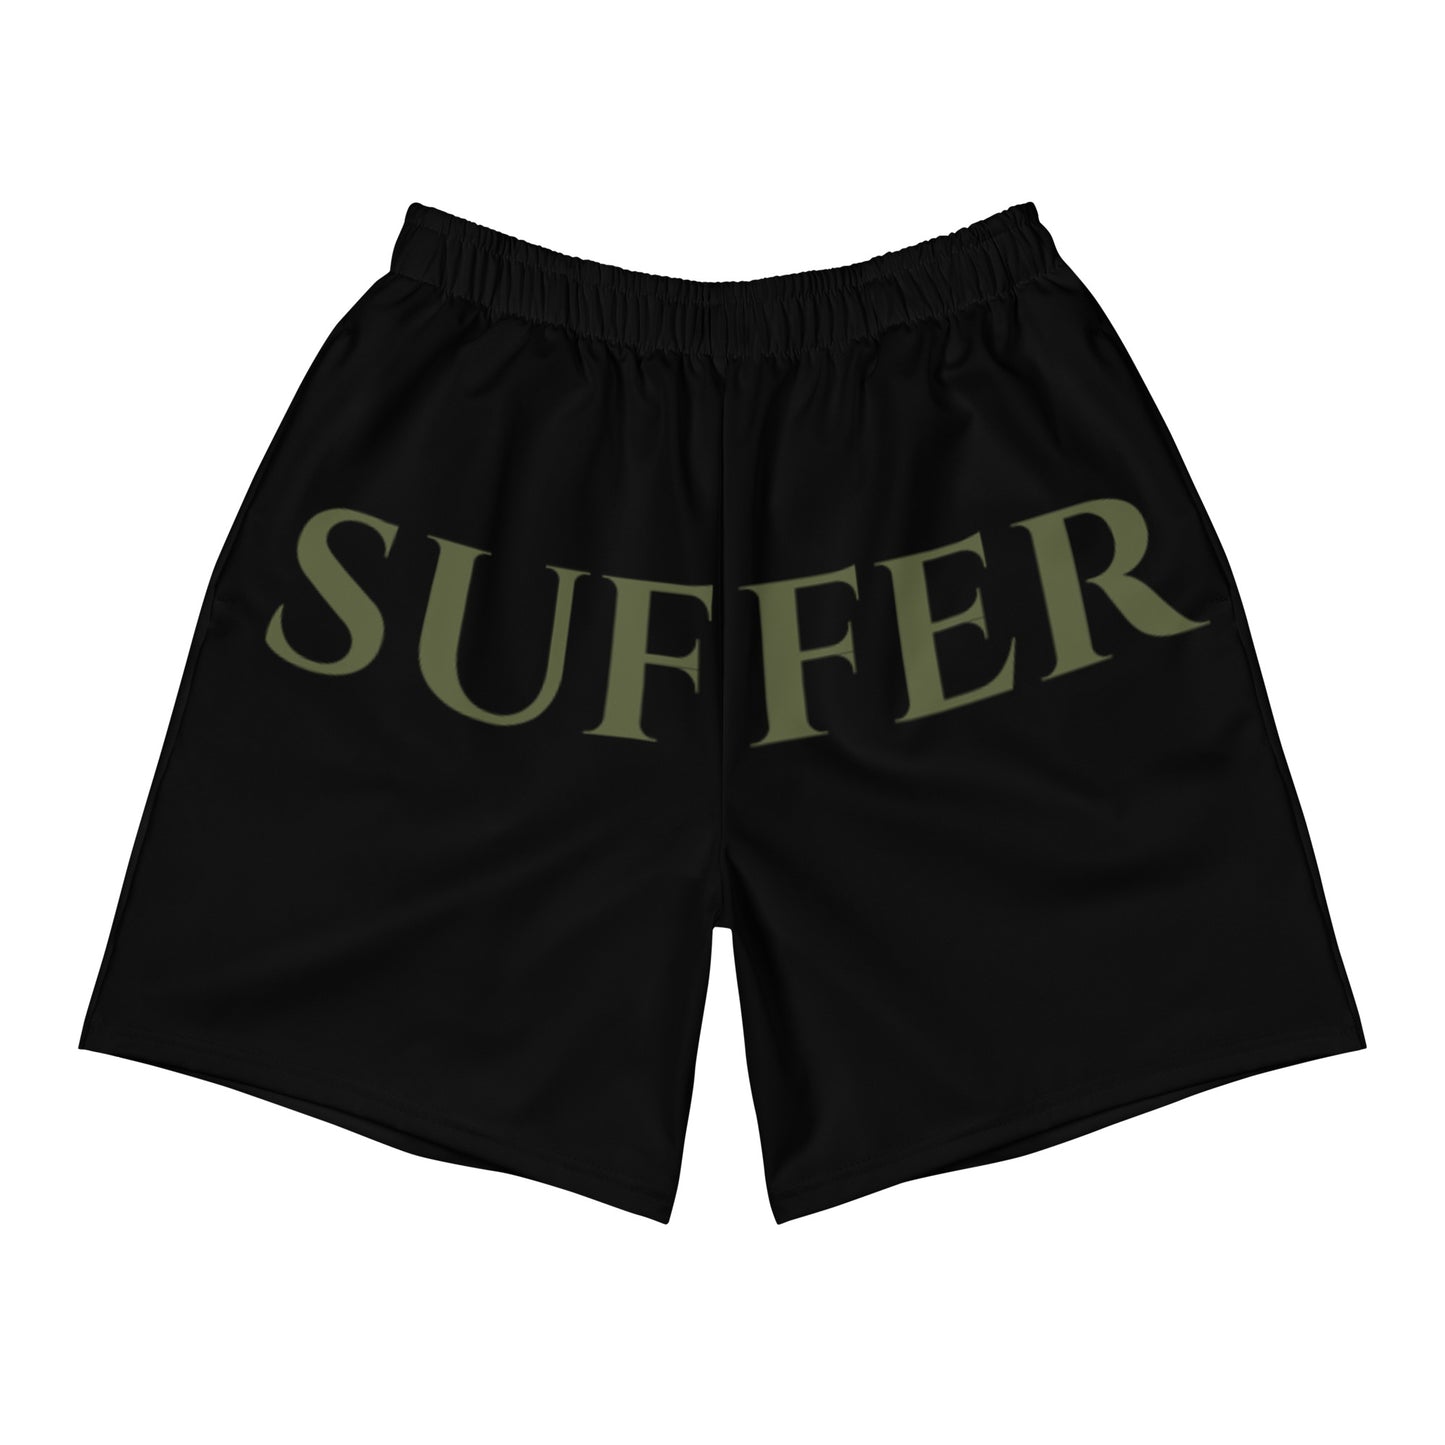 Blk/Olive Hip Suffer Athletic Shorts